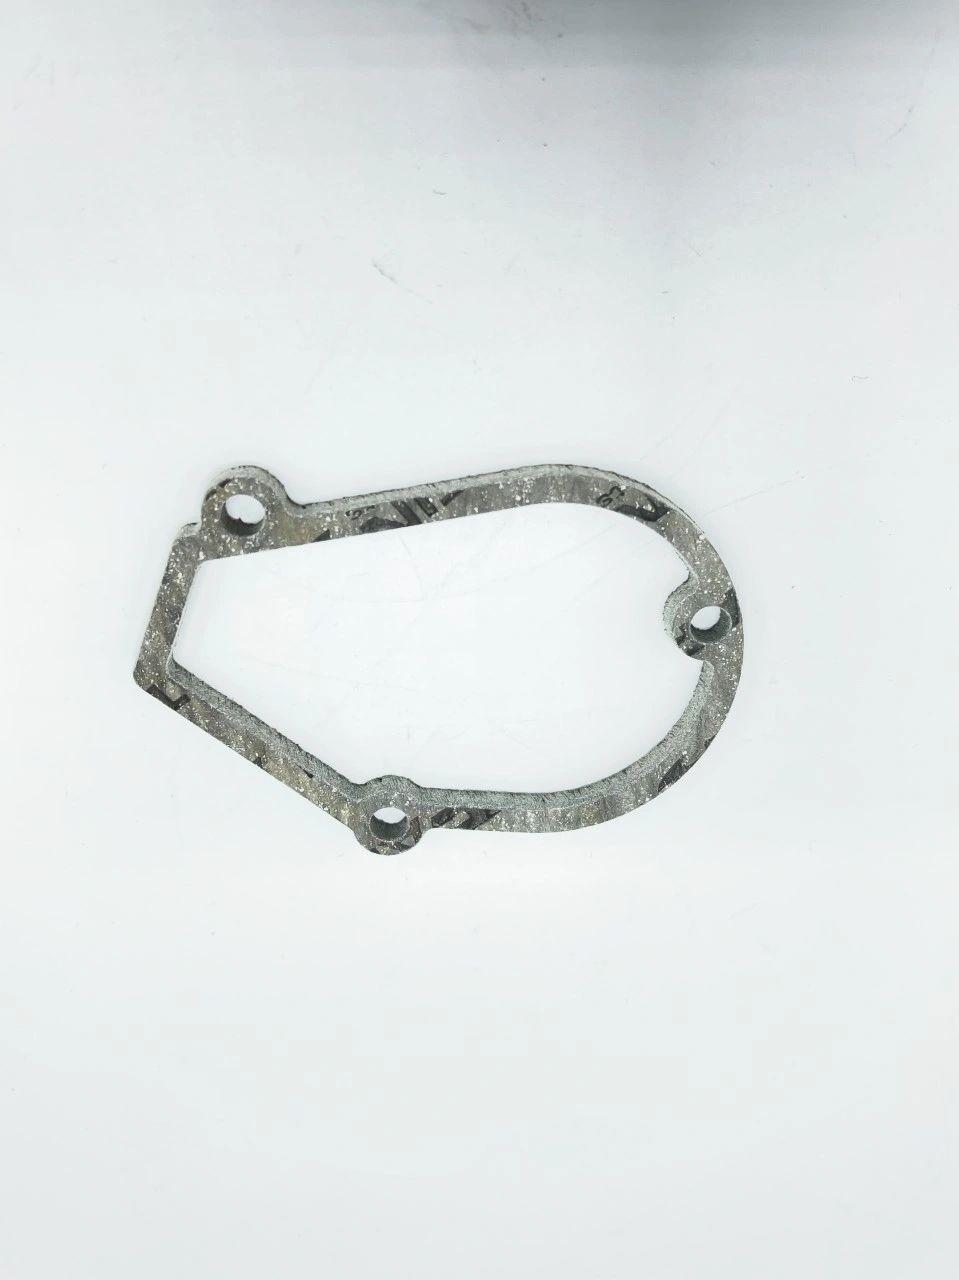 Clutch Cover Gasket - 0/000.490.9104